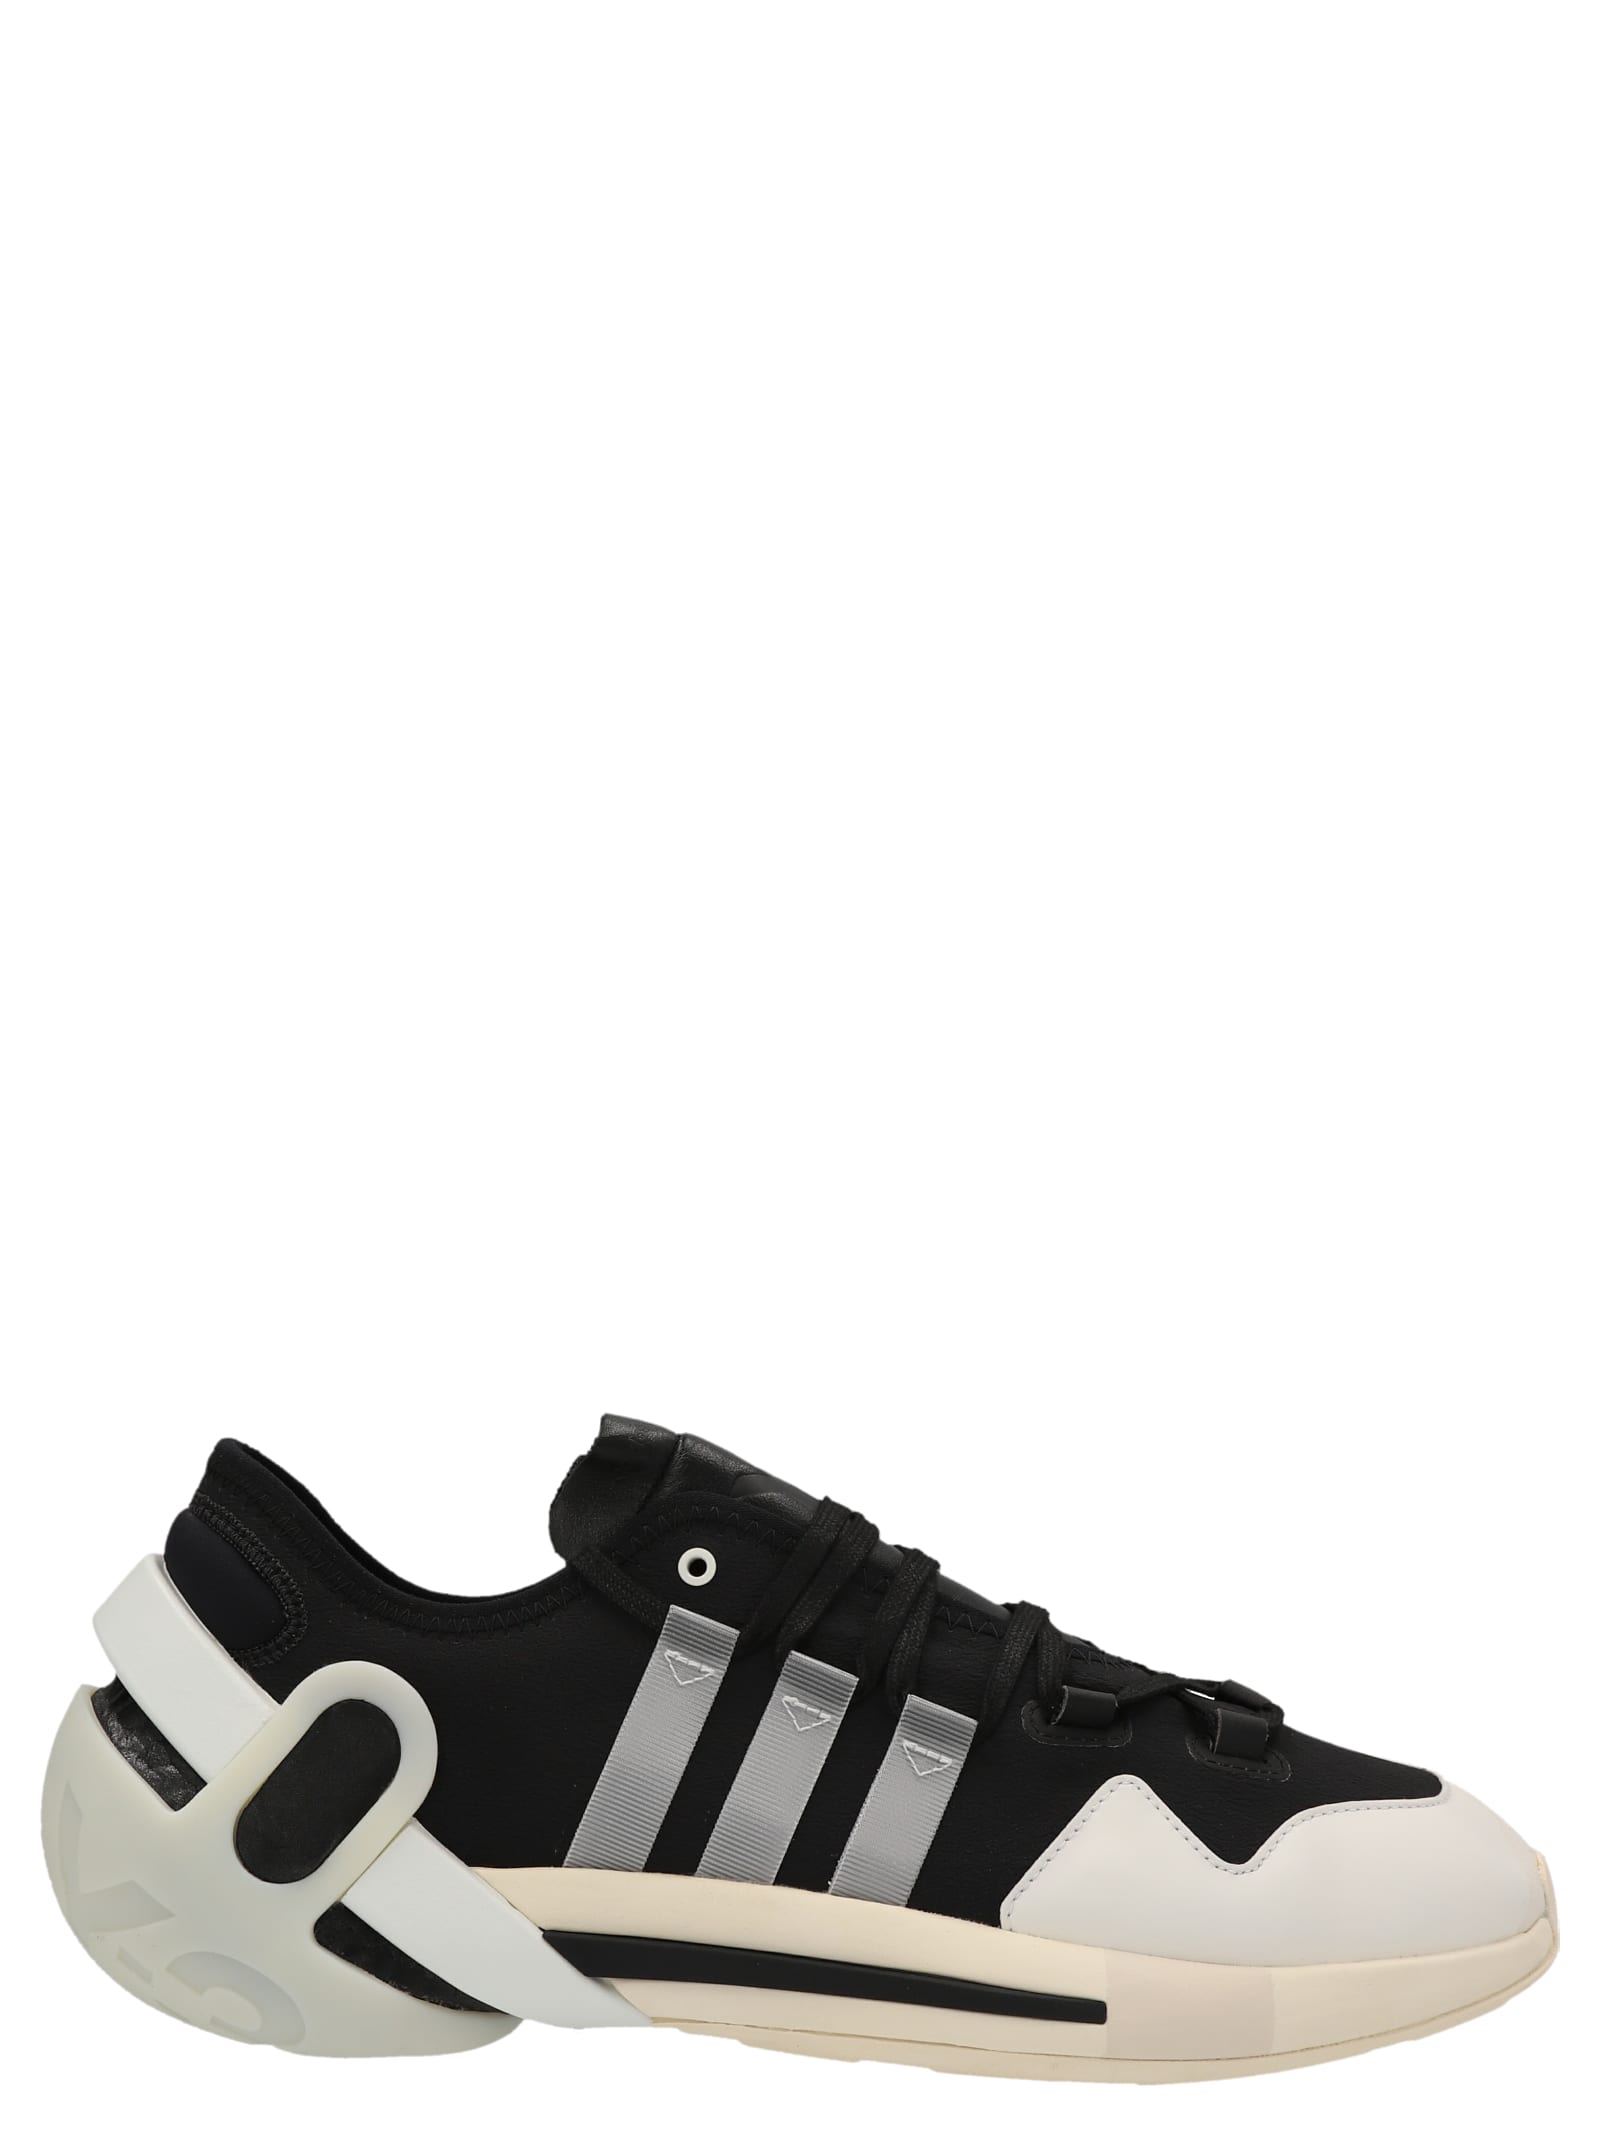 Y-3 idoso Boost Sneakers